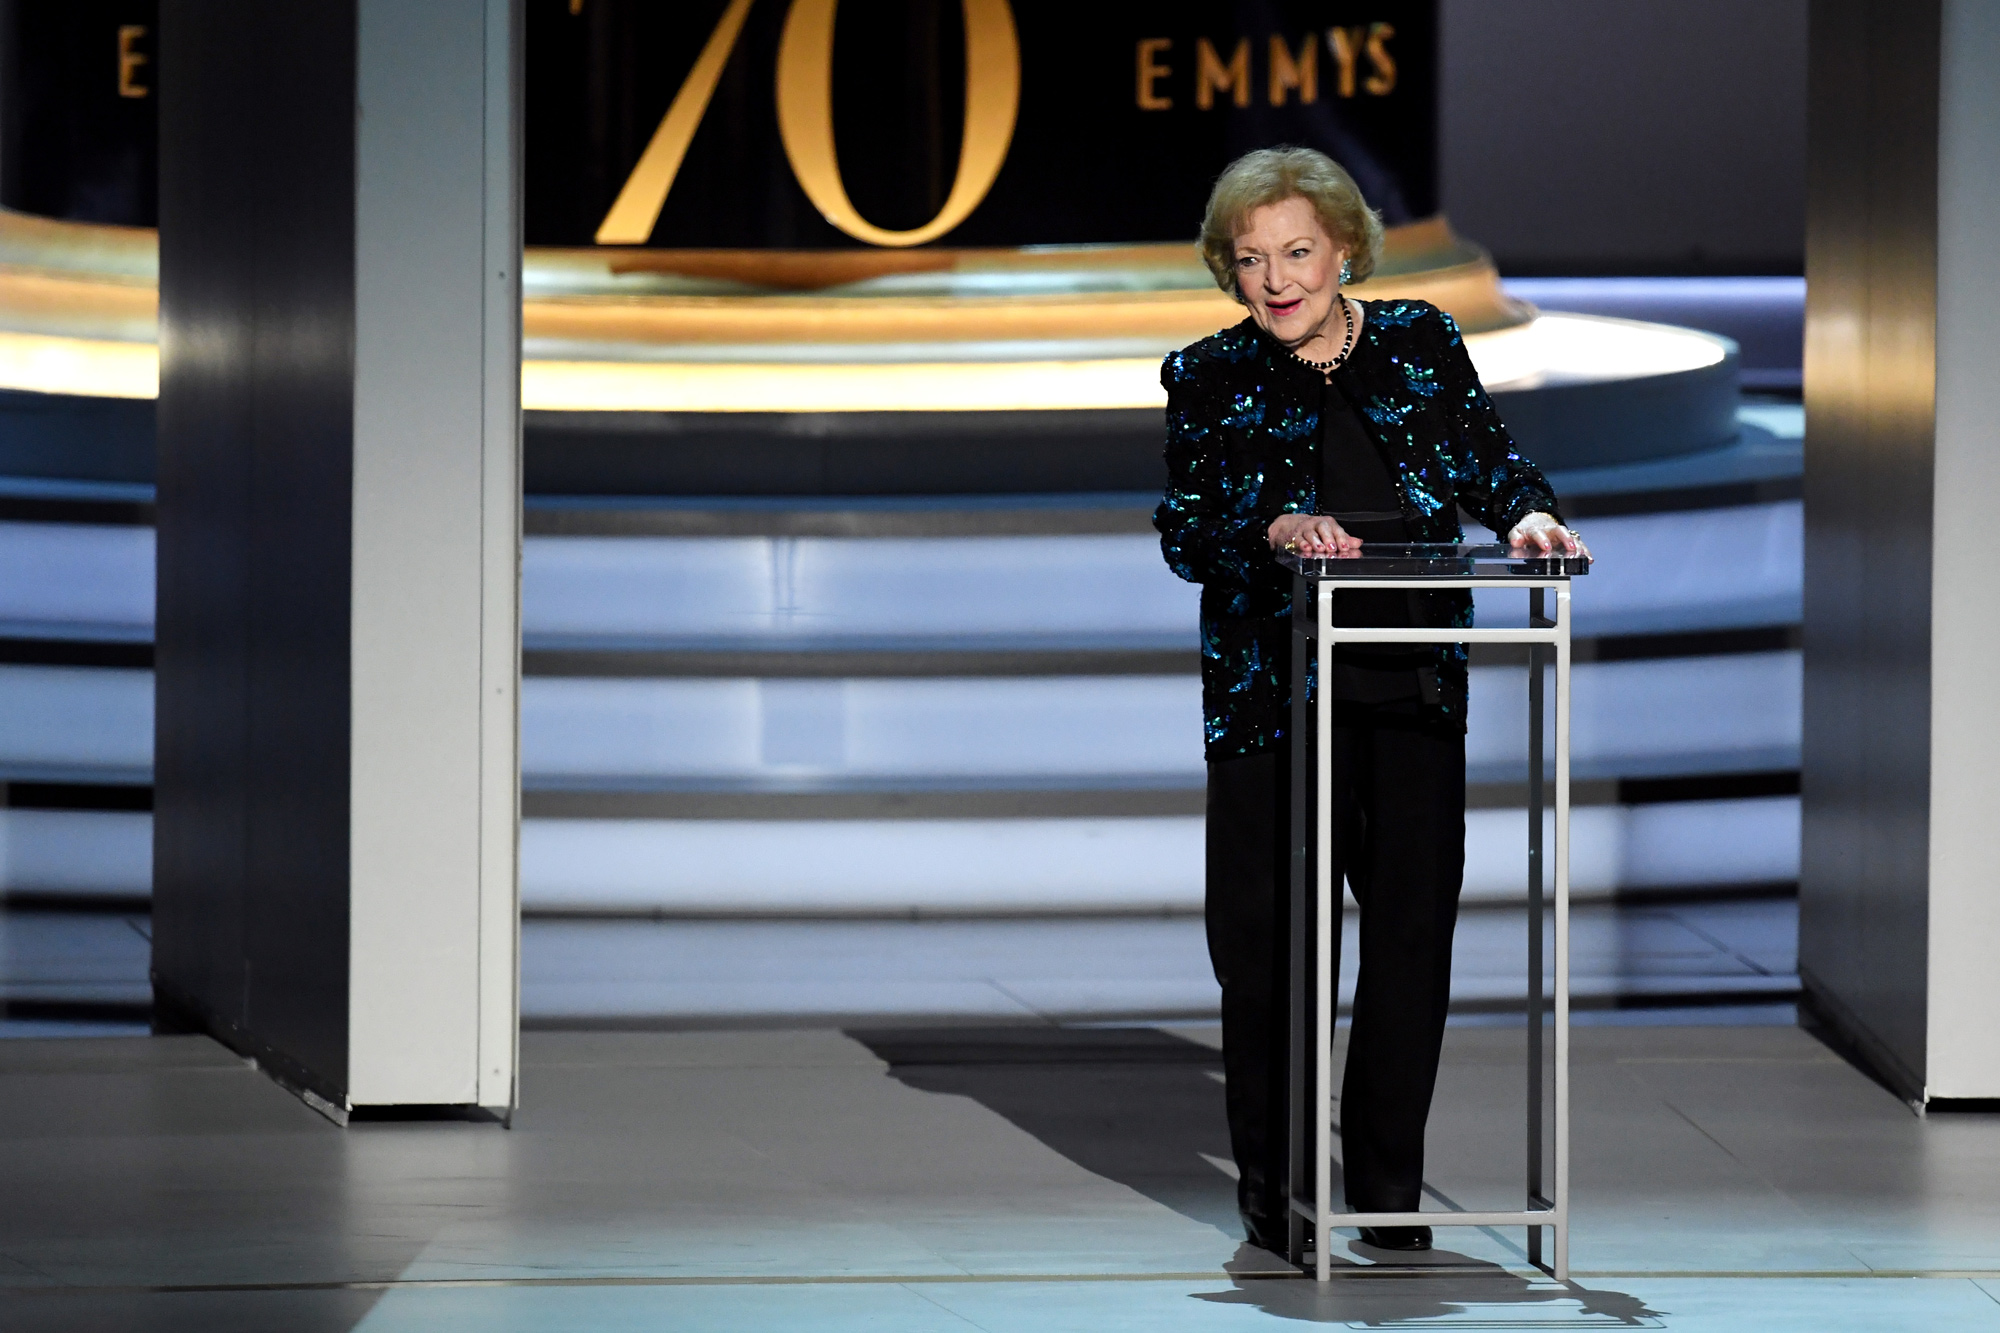 Betty White speaks on stage during the 70th Emmy Awards at Microsoft Theater on September 17, 2018 in Los Angeles.